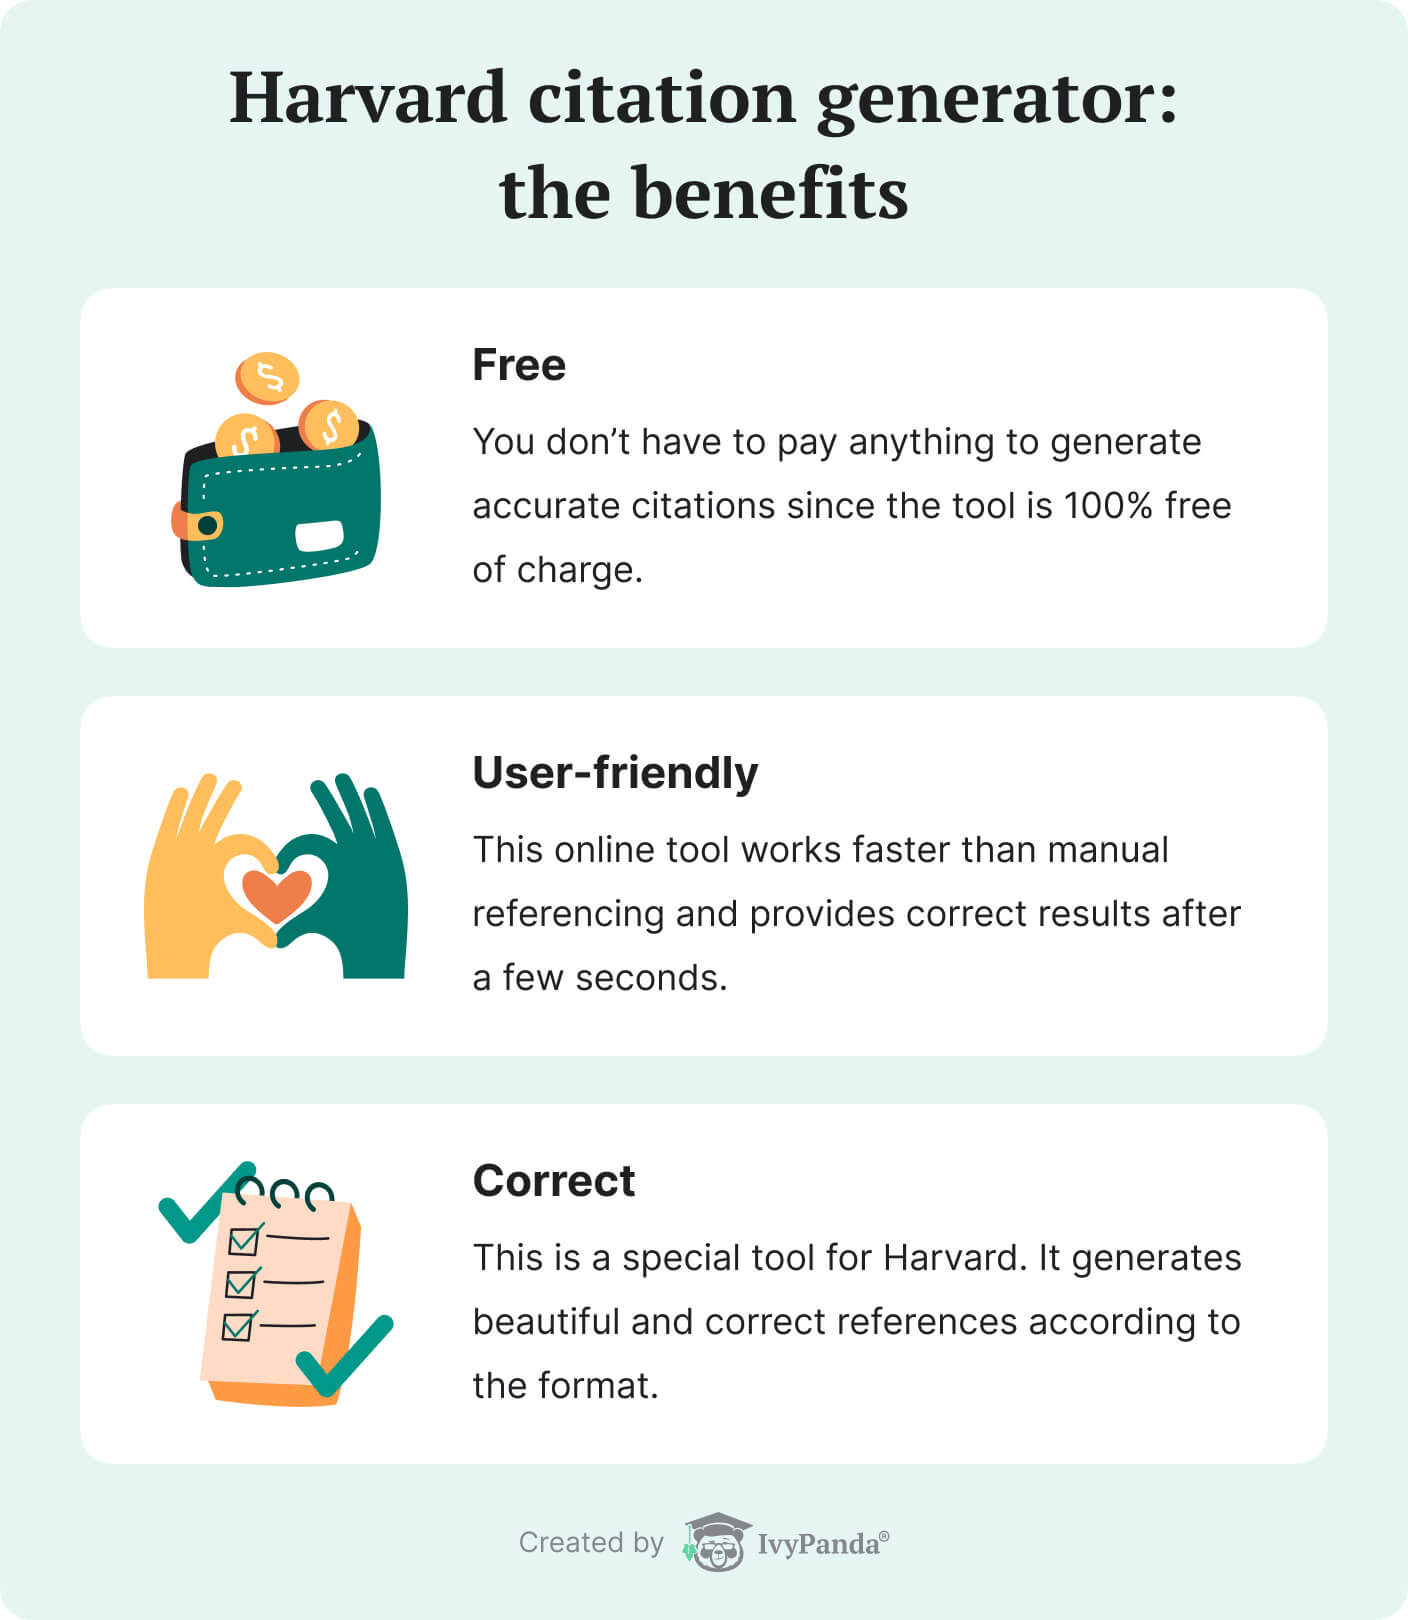 The picture lists the benefits of the Harvard citation generator by IvyPanda.